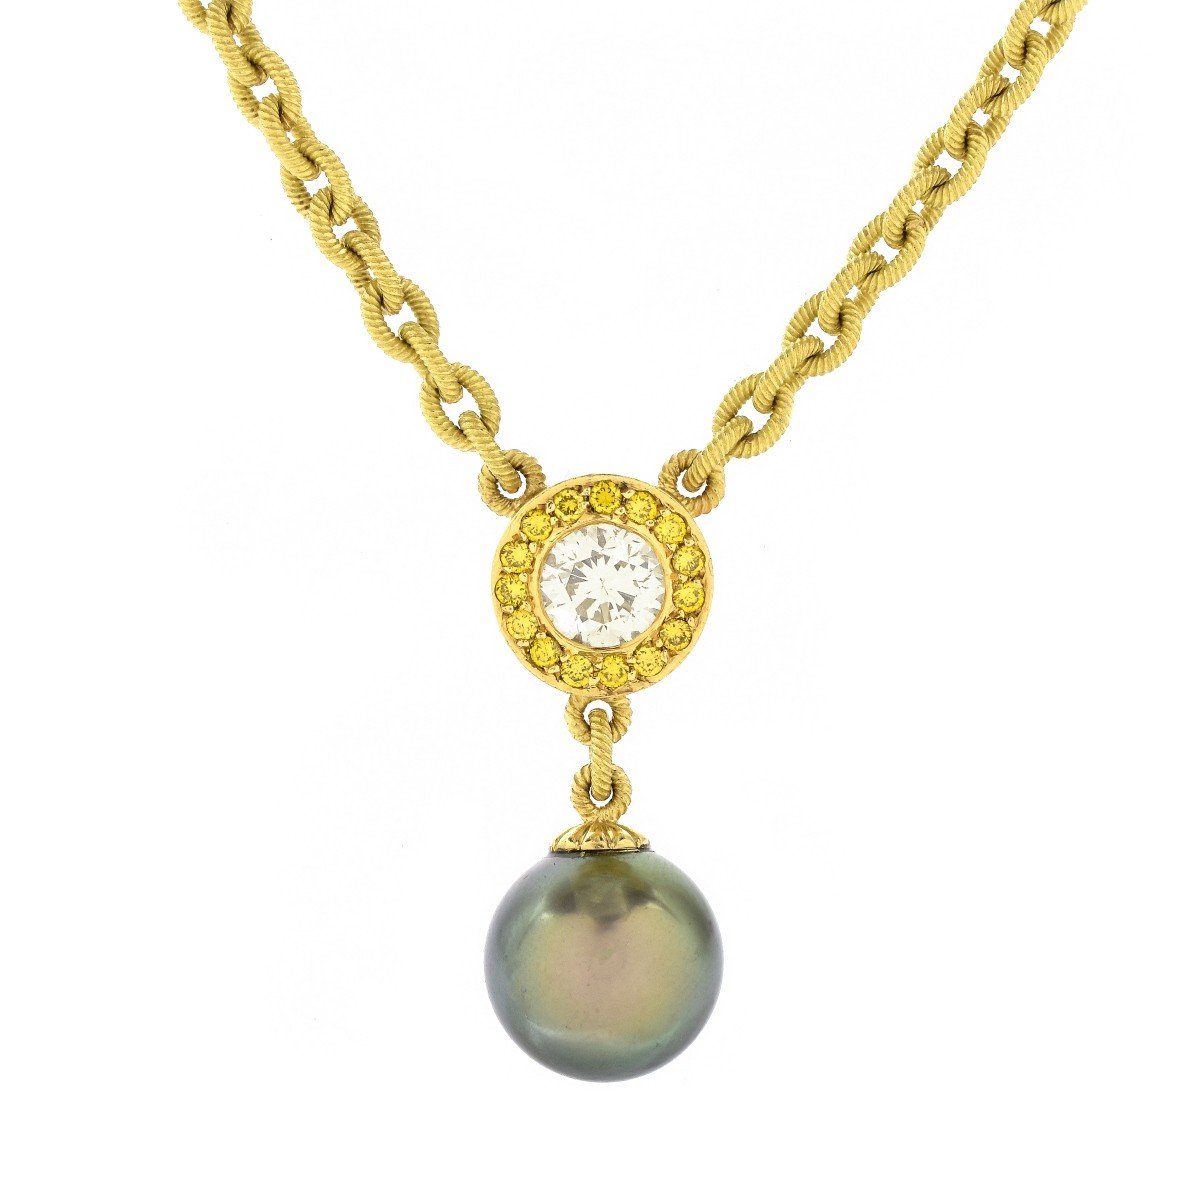 Diamond, South Sea Pearl and 18K Gold Necklace